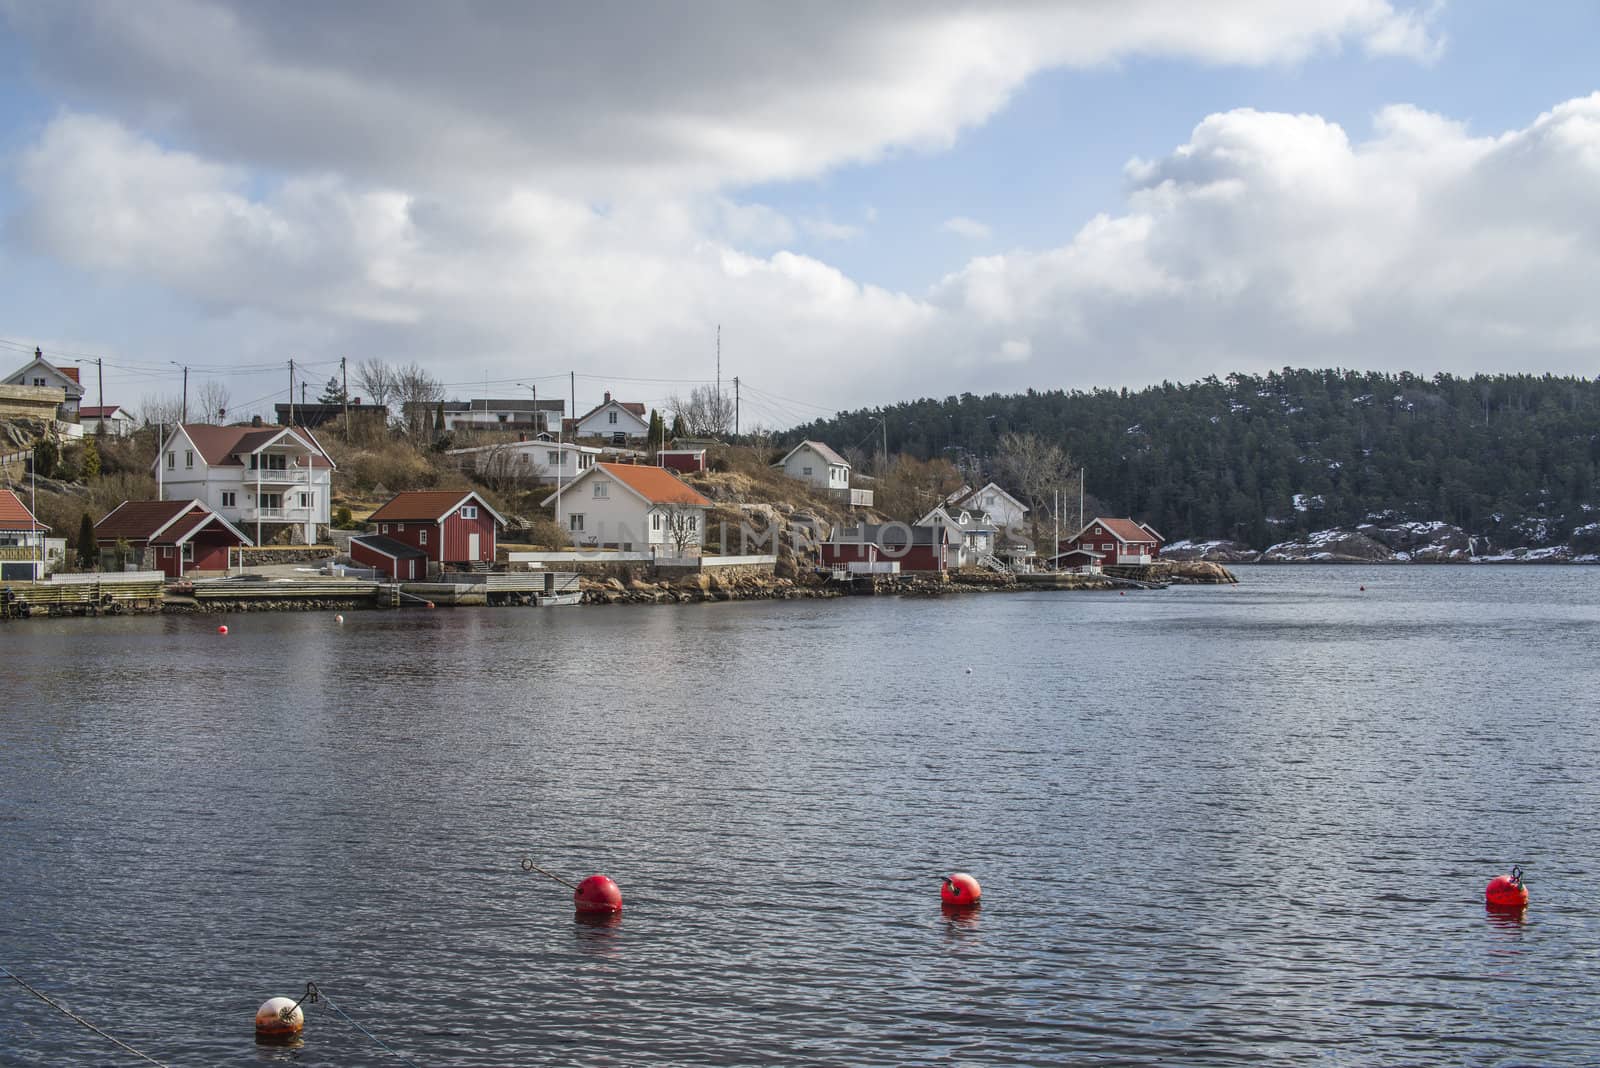 Sponvika is a village in Halden municipality, Norway, and is mainly a summer resort with many cottages and holiday guests, and in summer the population increases significantly. The village has 499 inhabitants. The picture was shot one day in March 2013.